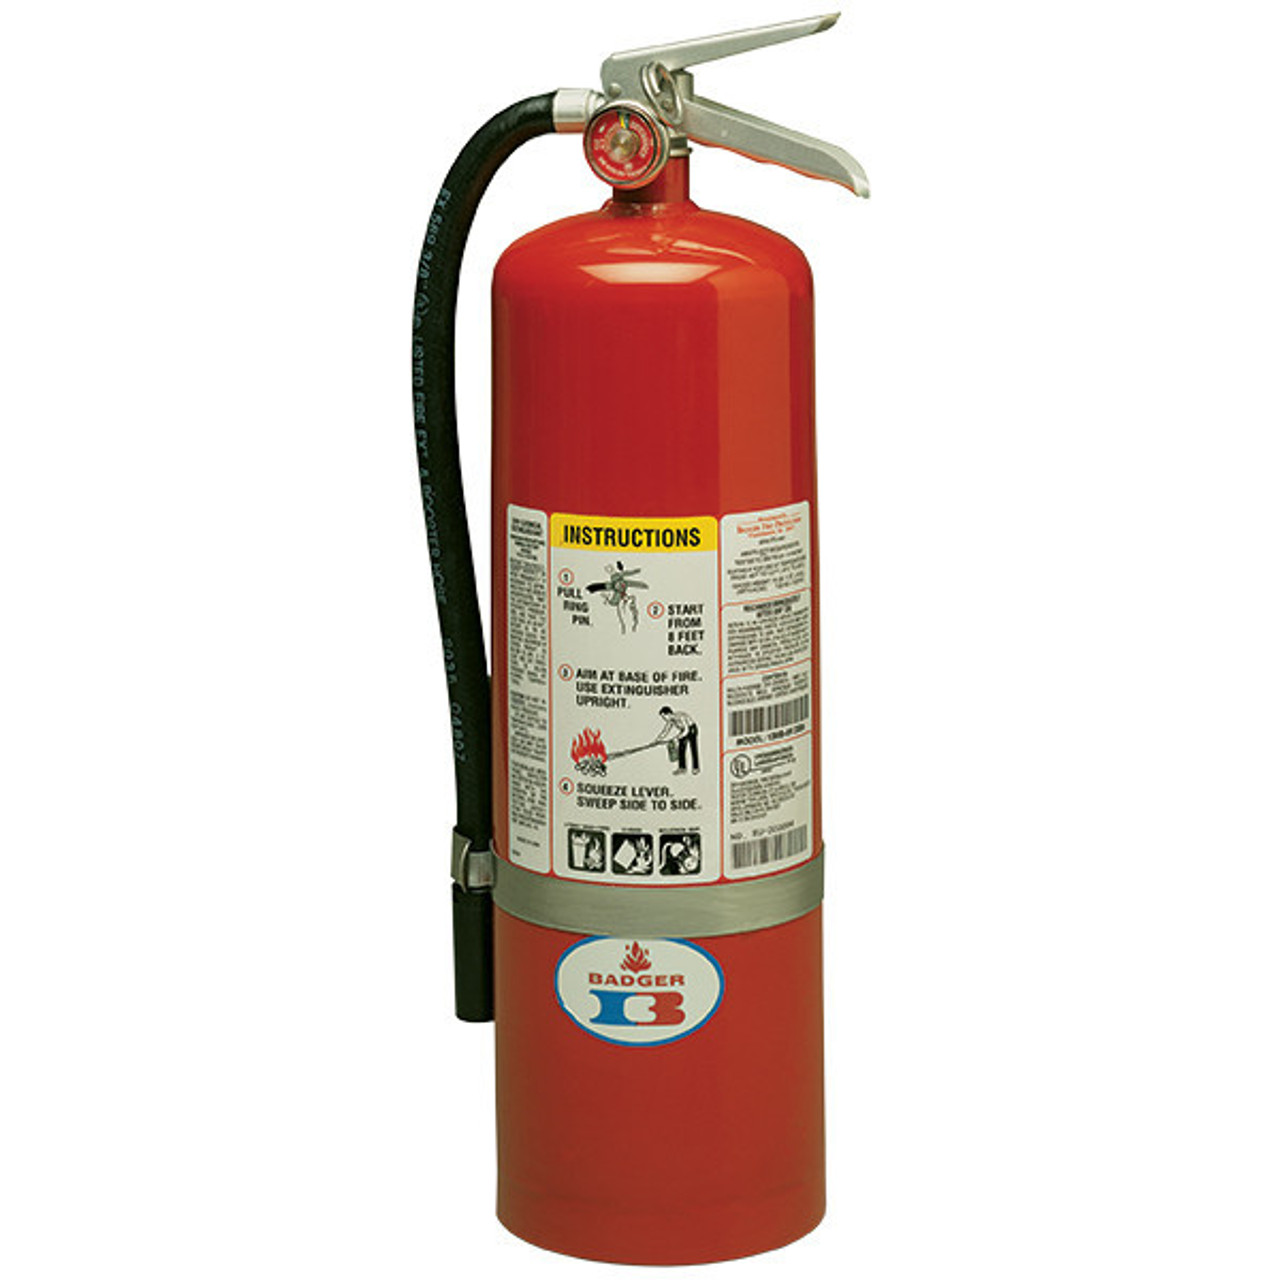 Badger Standard 10 lb ABC Fire Extinguisher w/ Wall Hook - 22603